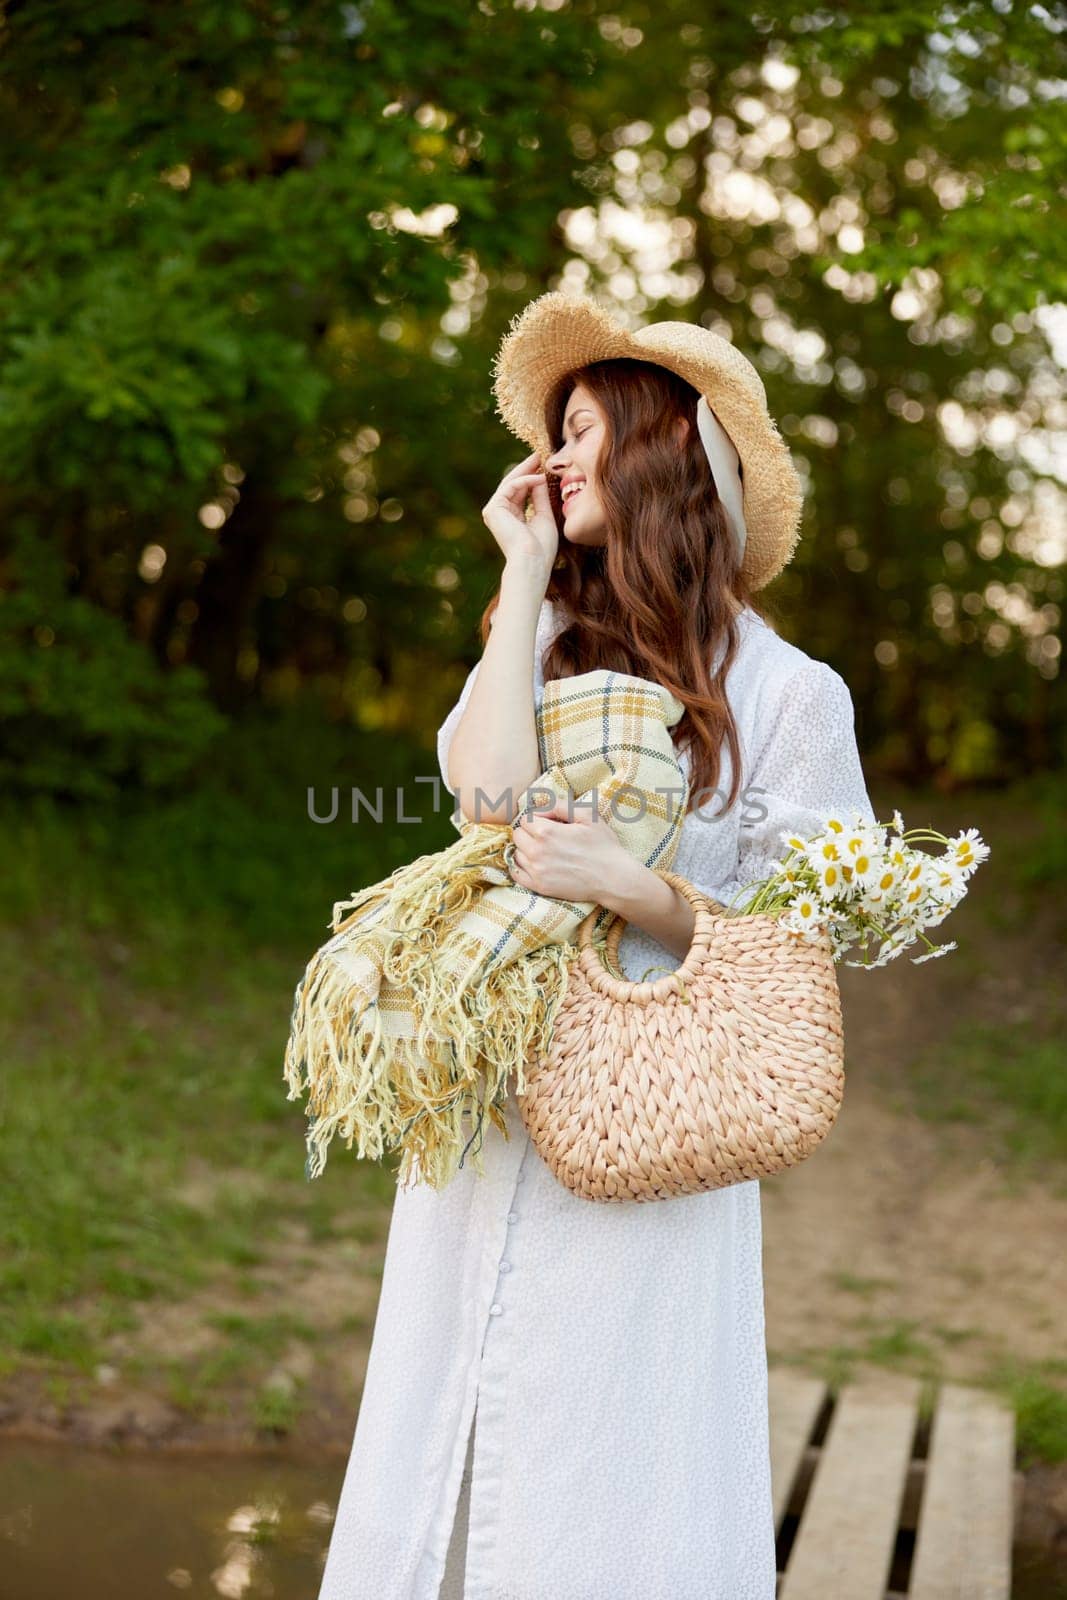 portrait of a cute woman in a wicker hat, light dress and with a plaid in her hands resting in nature. High quality photo